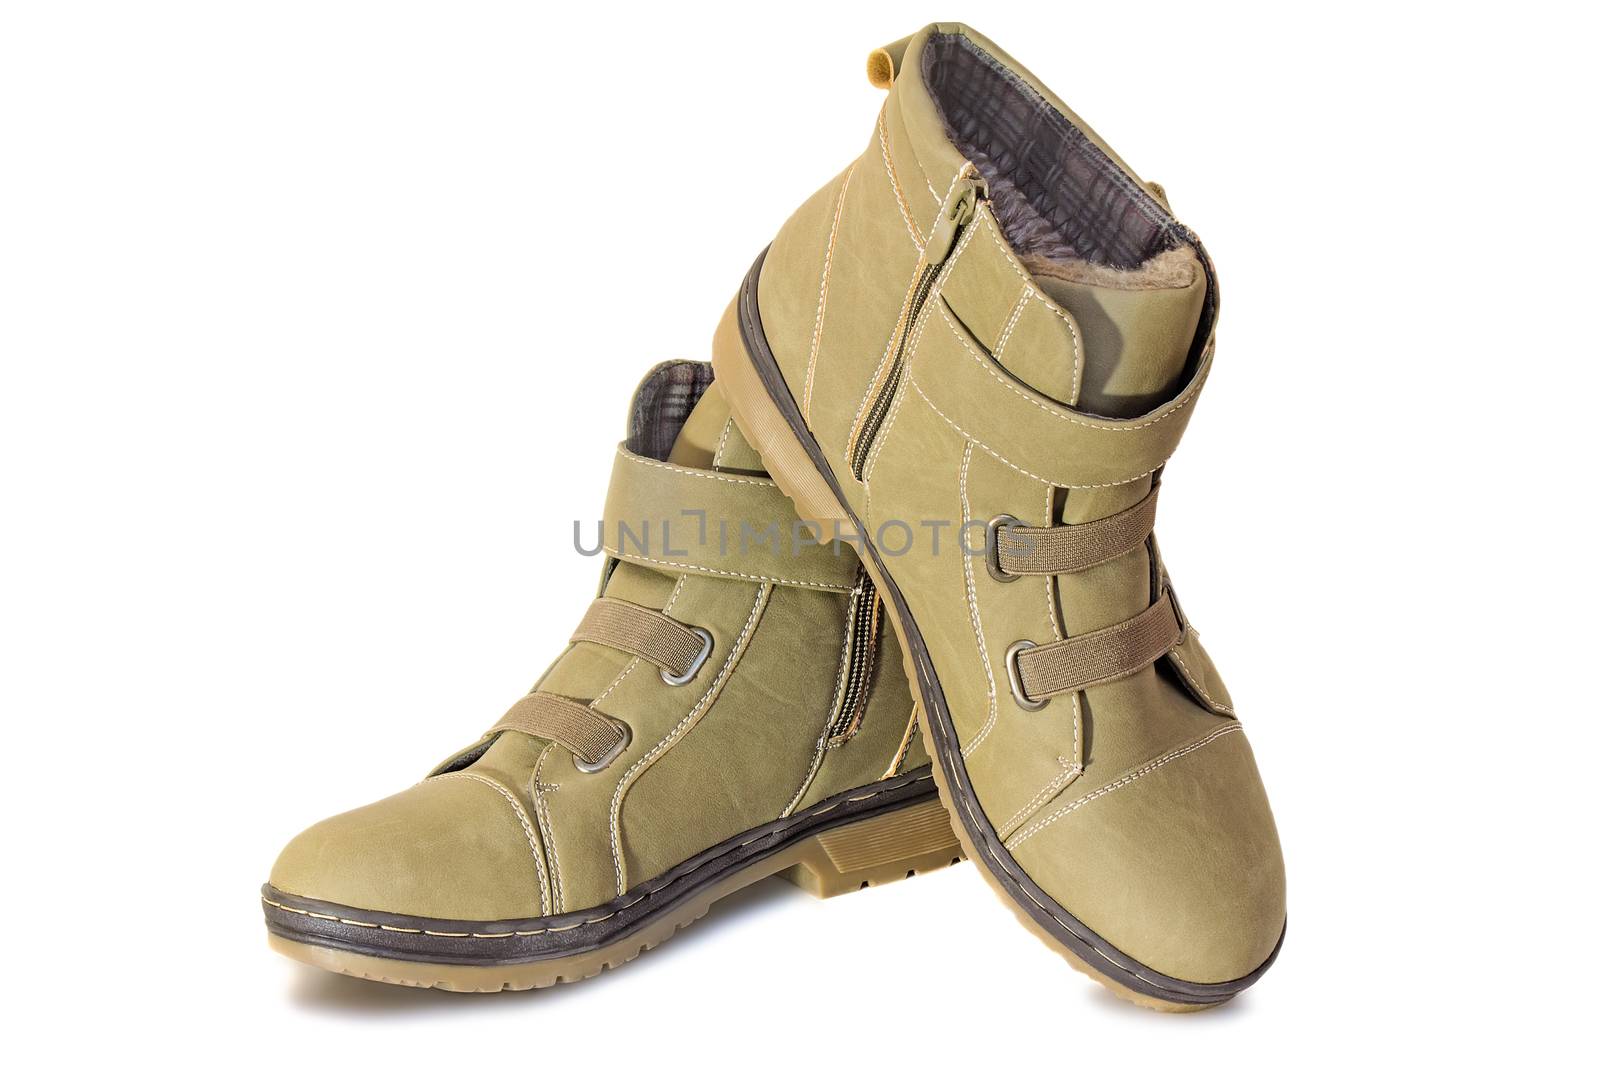 Comfortable and warm winter suede boots for women. Presented on a white background.